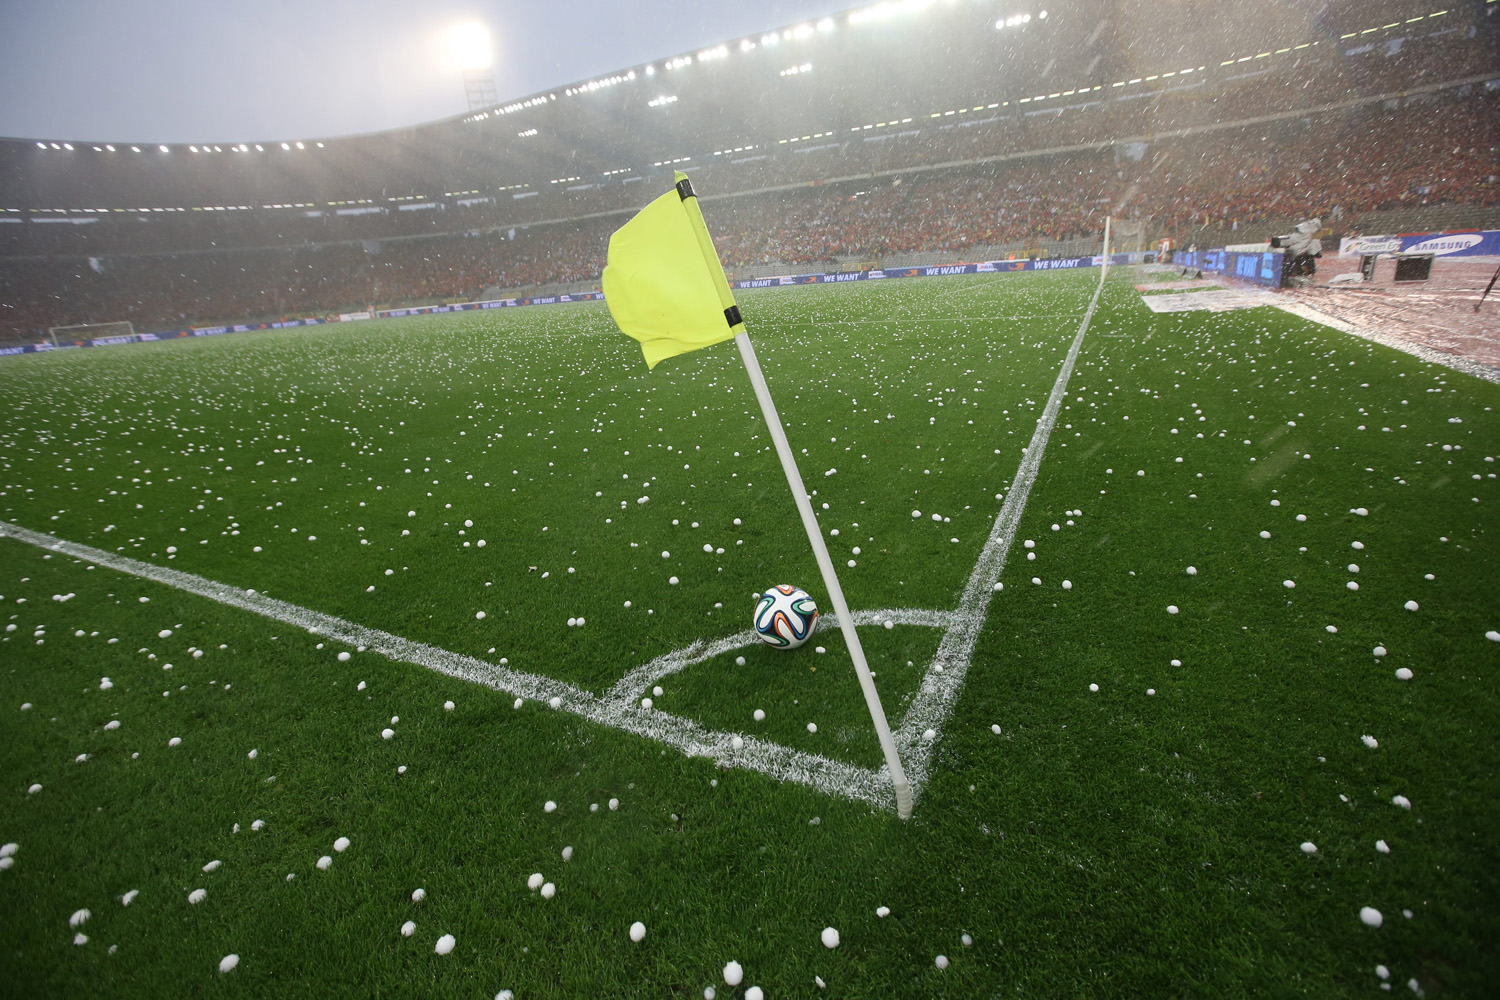 Pellets of ice are scattered on the pitch after the hailstorm that interrupted the international friendly soccer match between Belgium and Tunisia at King Baudoin stadium in Brussels on June 7, 2014.